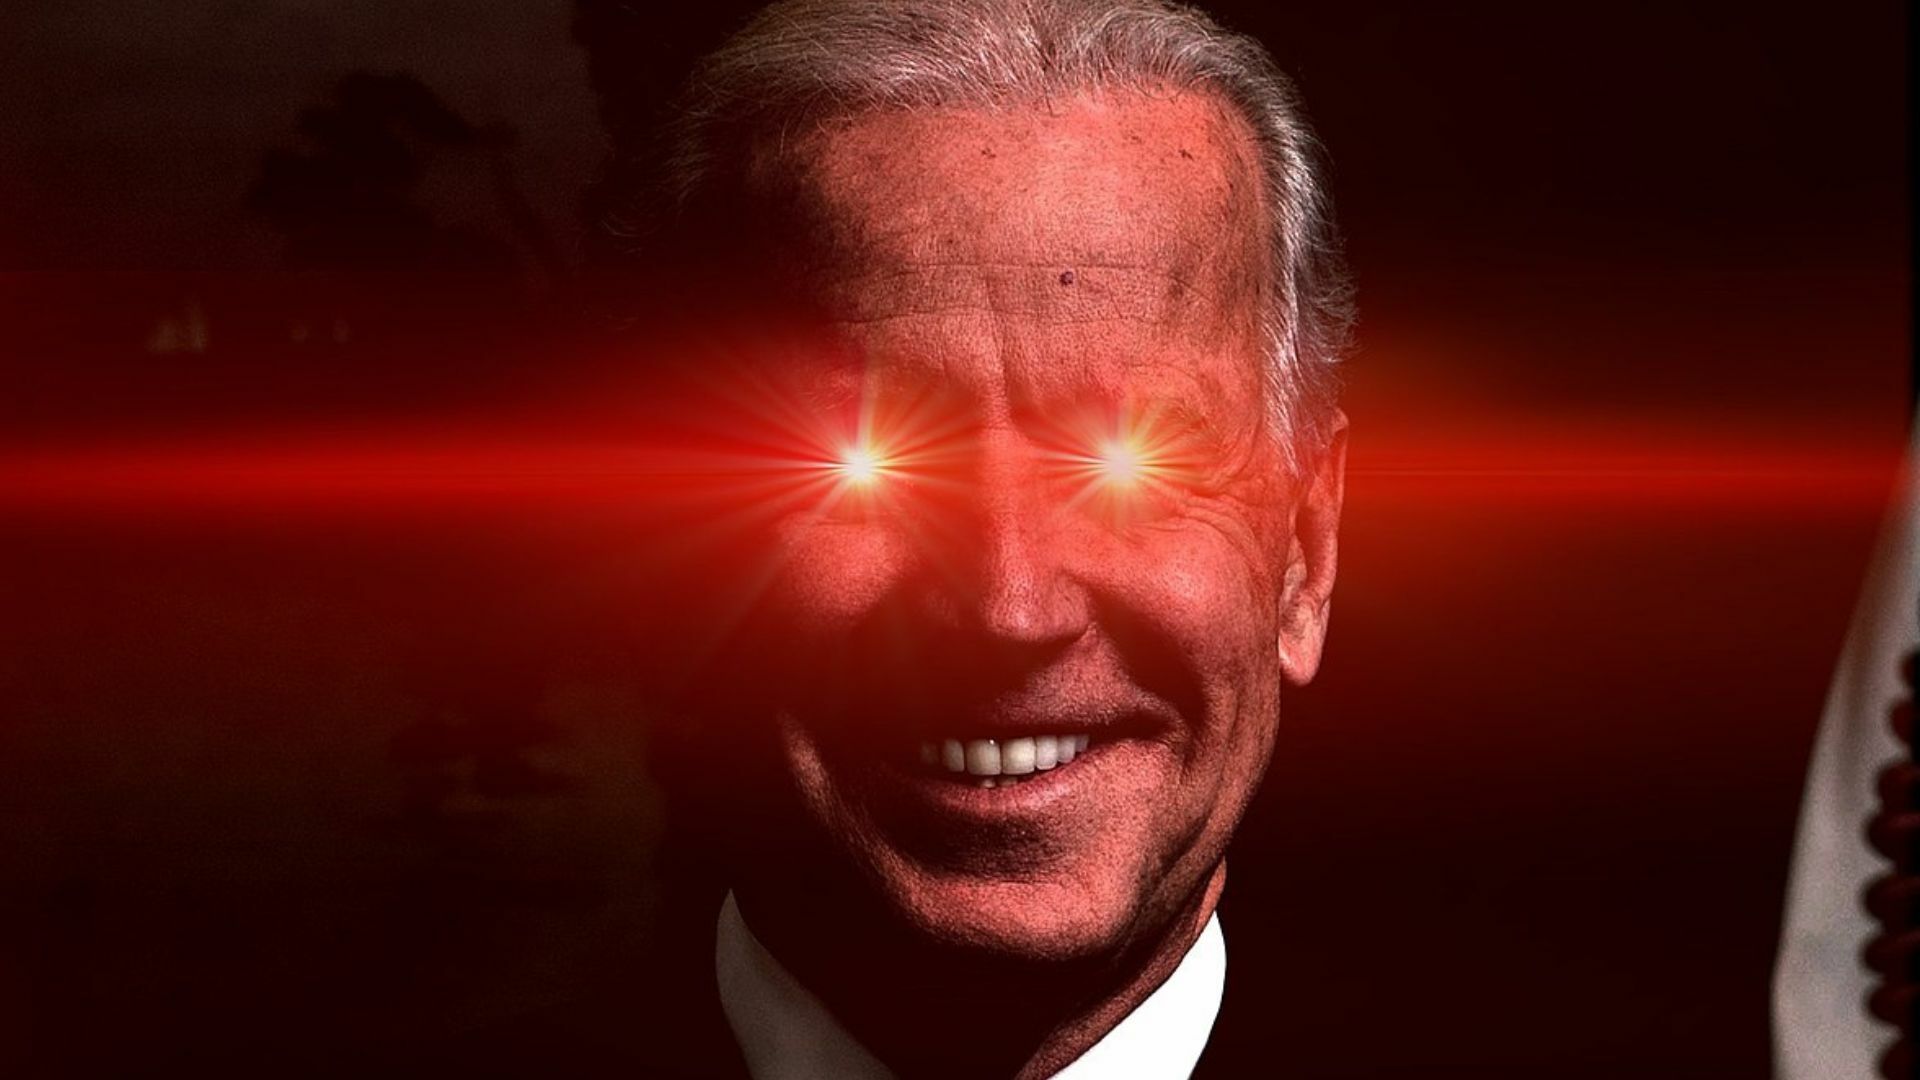 Joe Biden with red laser pointing out of his eyes.